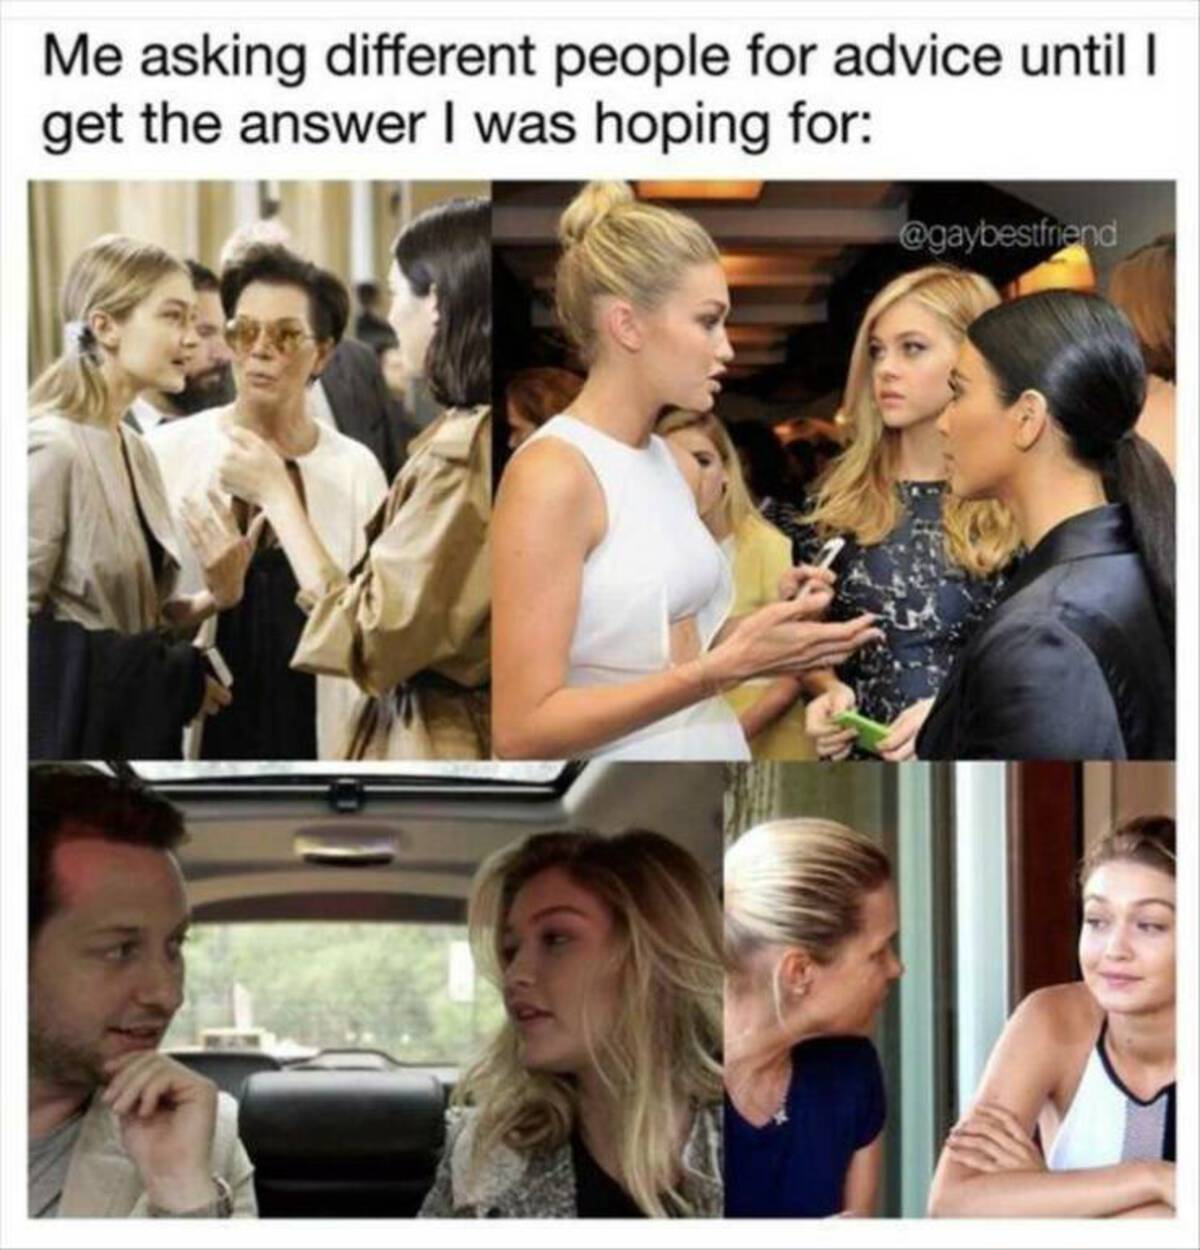 conversation - Me asking different people for advice until I get the answer I was hoping for